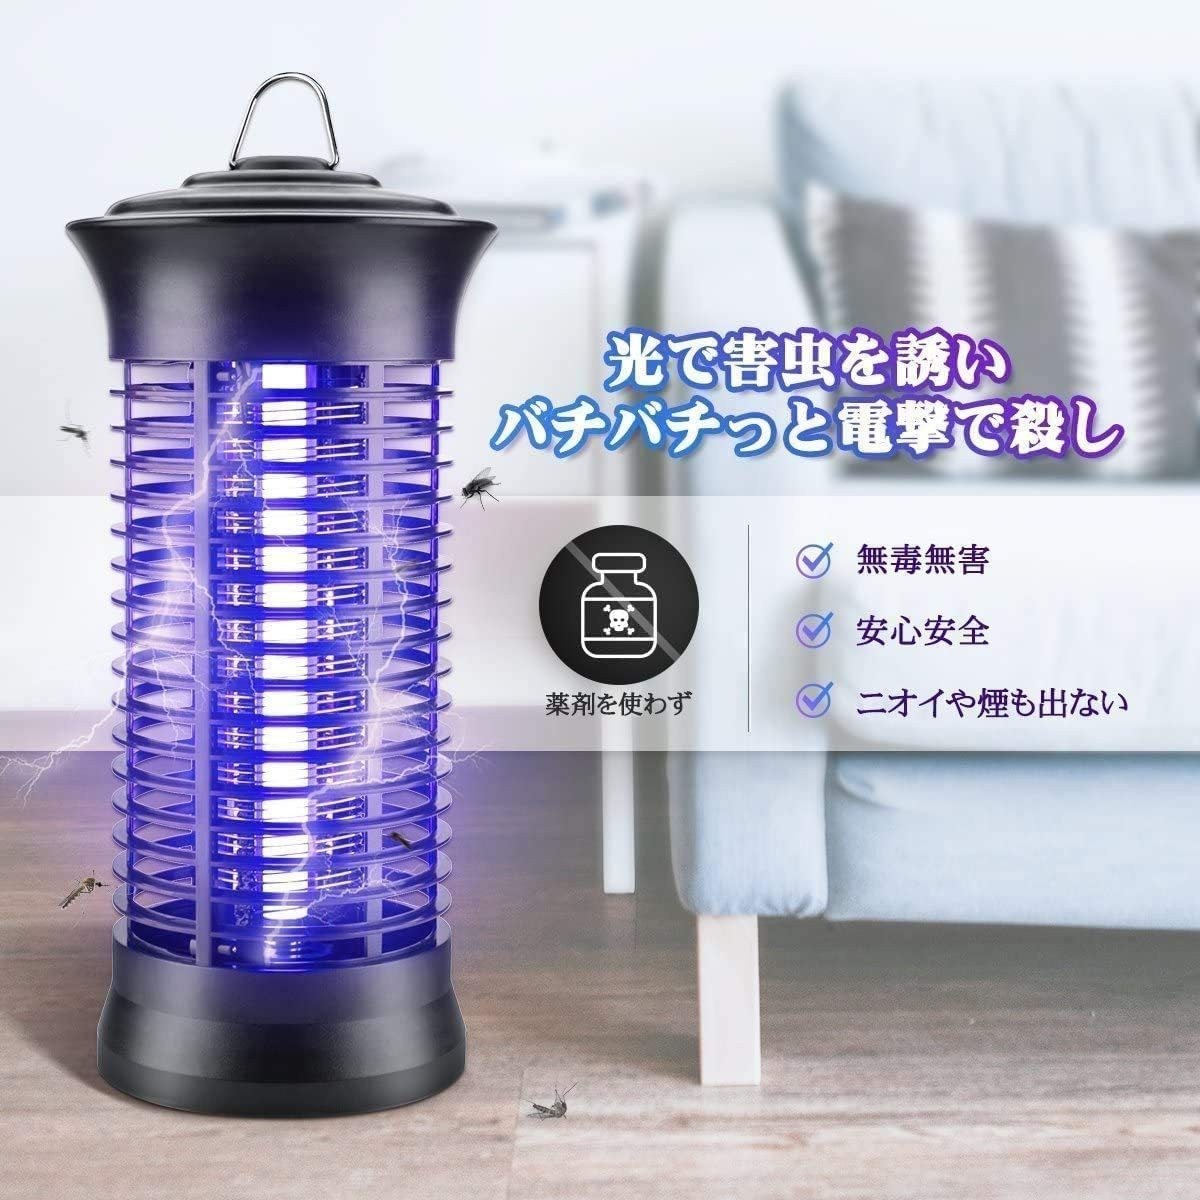 [ price cut ] *2000 jpy prompt decision! upbi BUG ZAPPER QH10-6WC electric bug killer mosquito repellent vessel insecticide light . insect light electric shock light trap medicina un- necessary life span approximately 8000 hour less . quiet sound 